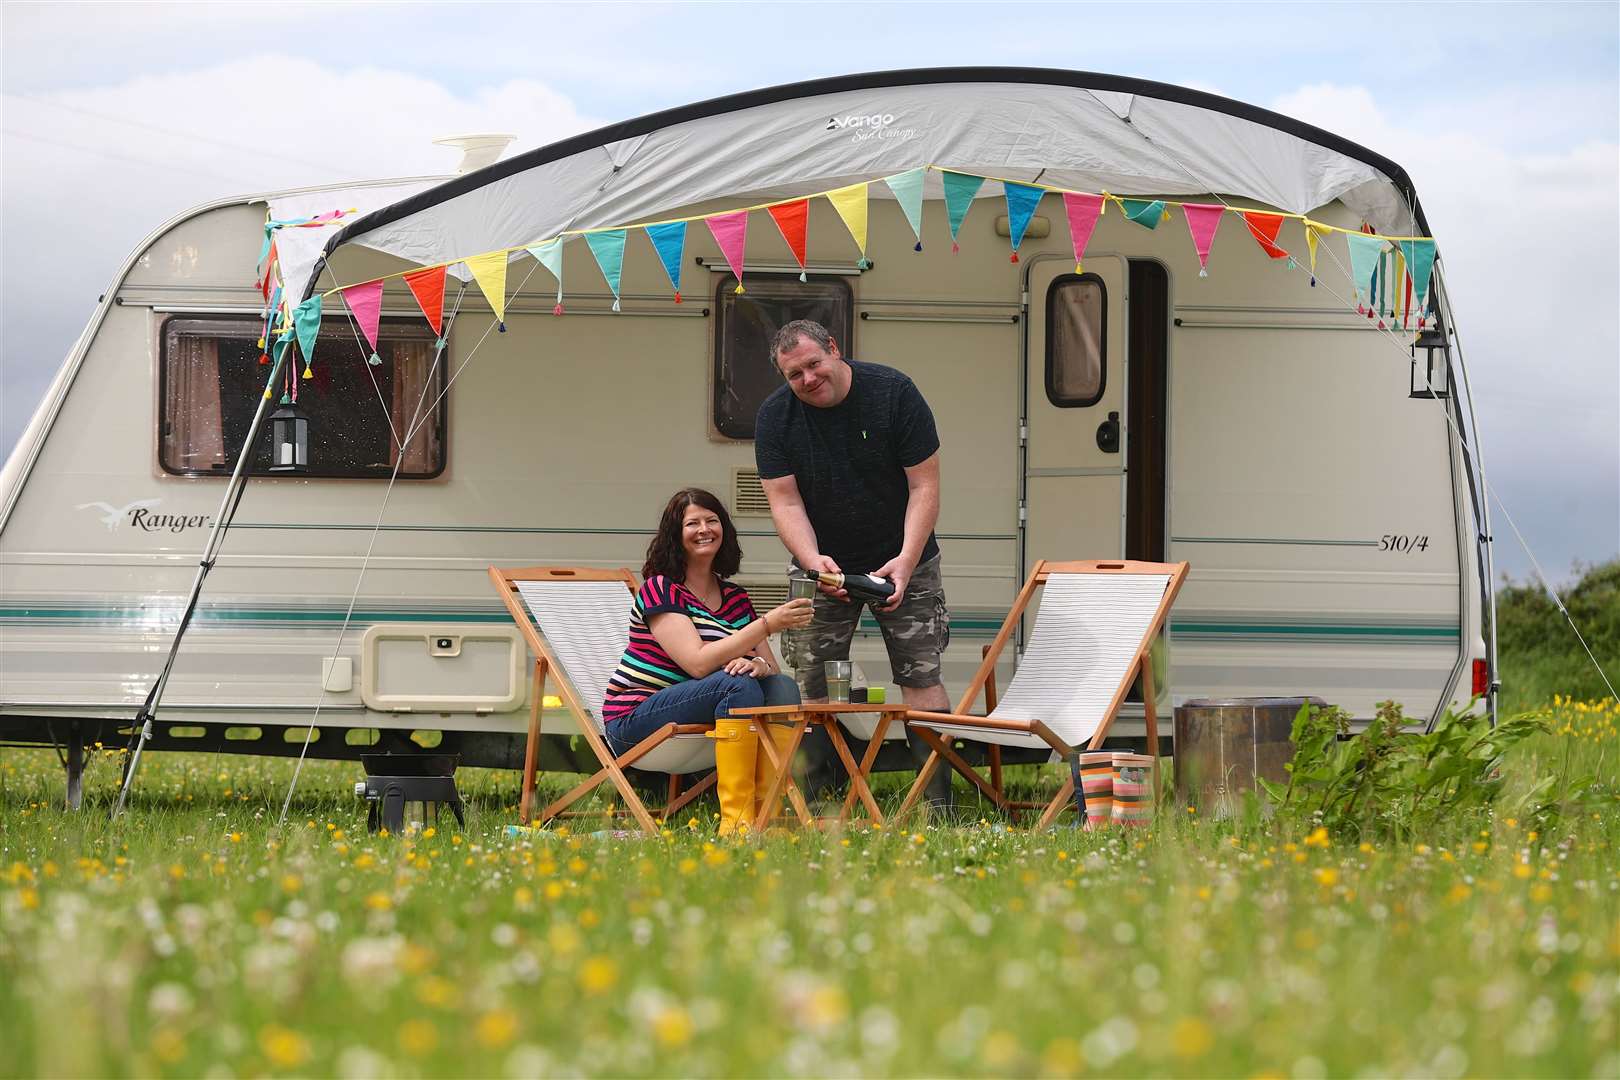 Stephen Webster and Arran Taylor spent some of their £1m Lotto prize on a second-hand caravan (Martin Bennett/Camelot/PA)